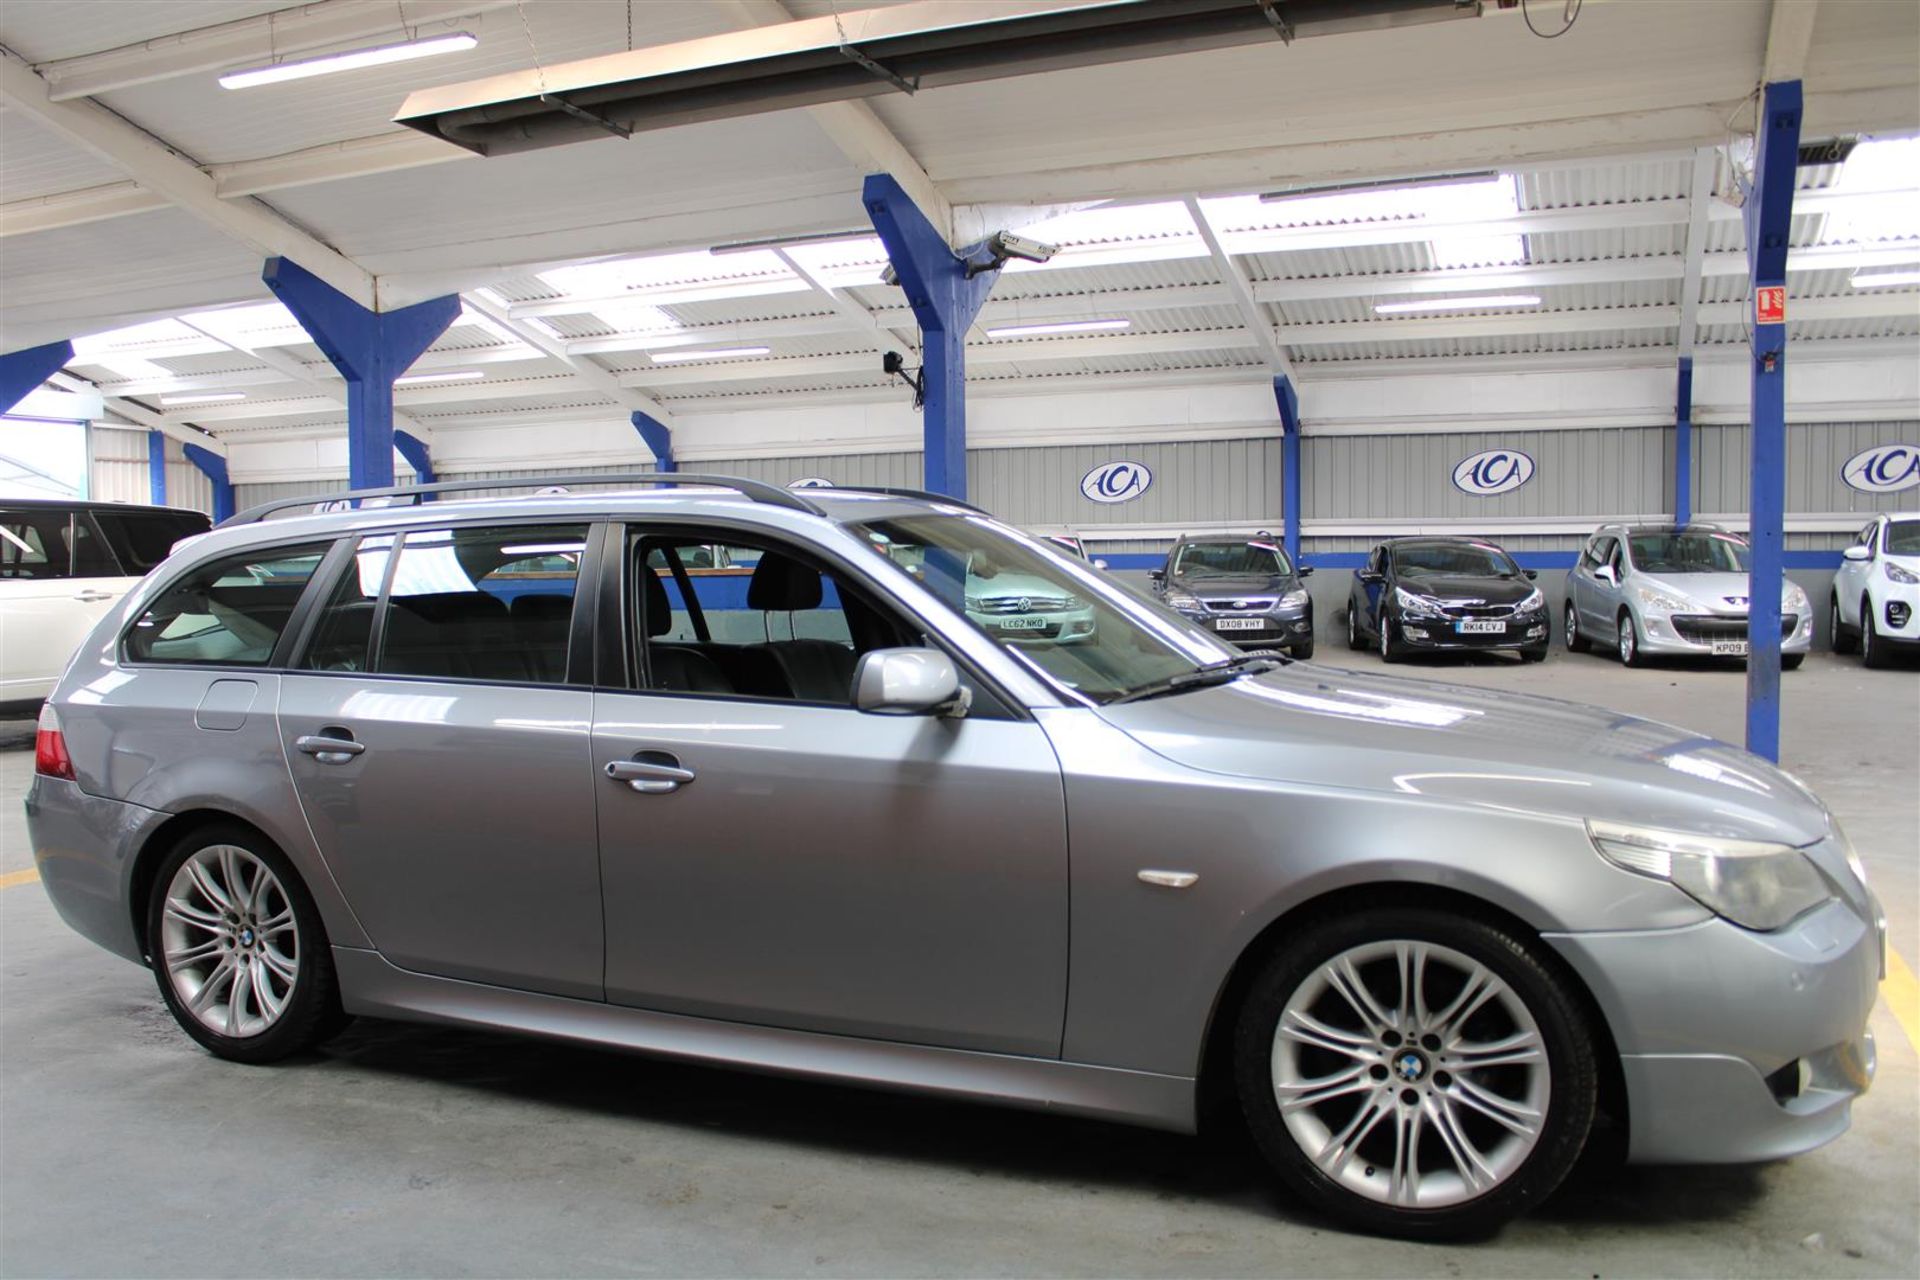 56 06 BMW 520D M Sport Touring Auto - Image 26 of 36